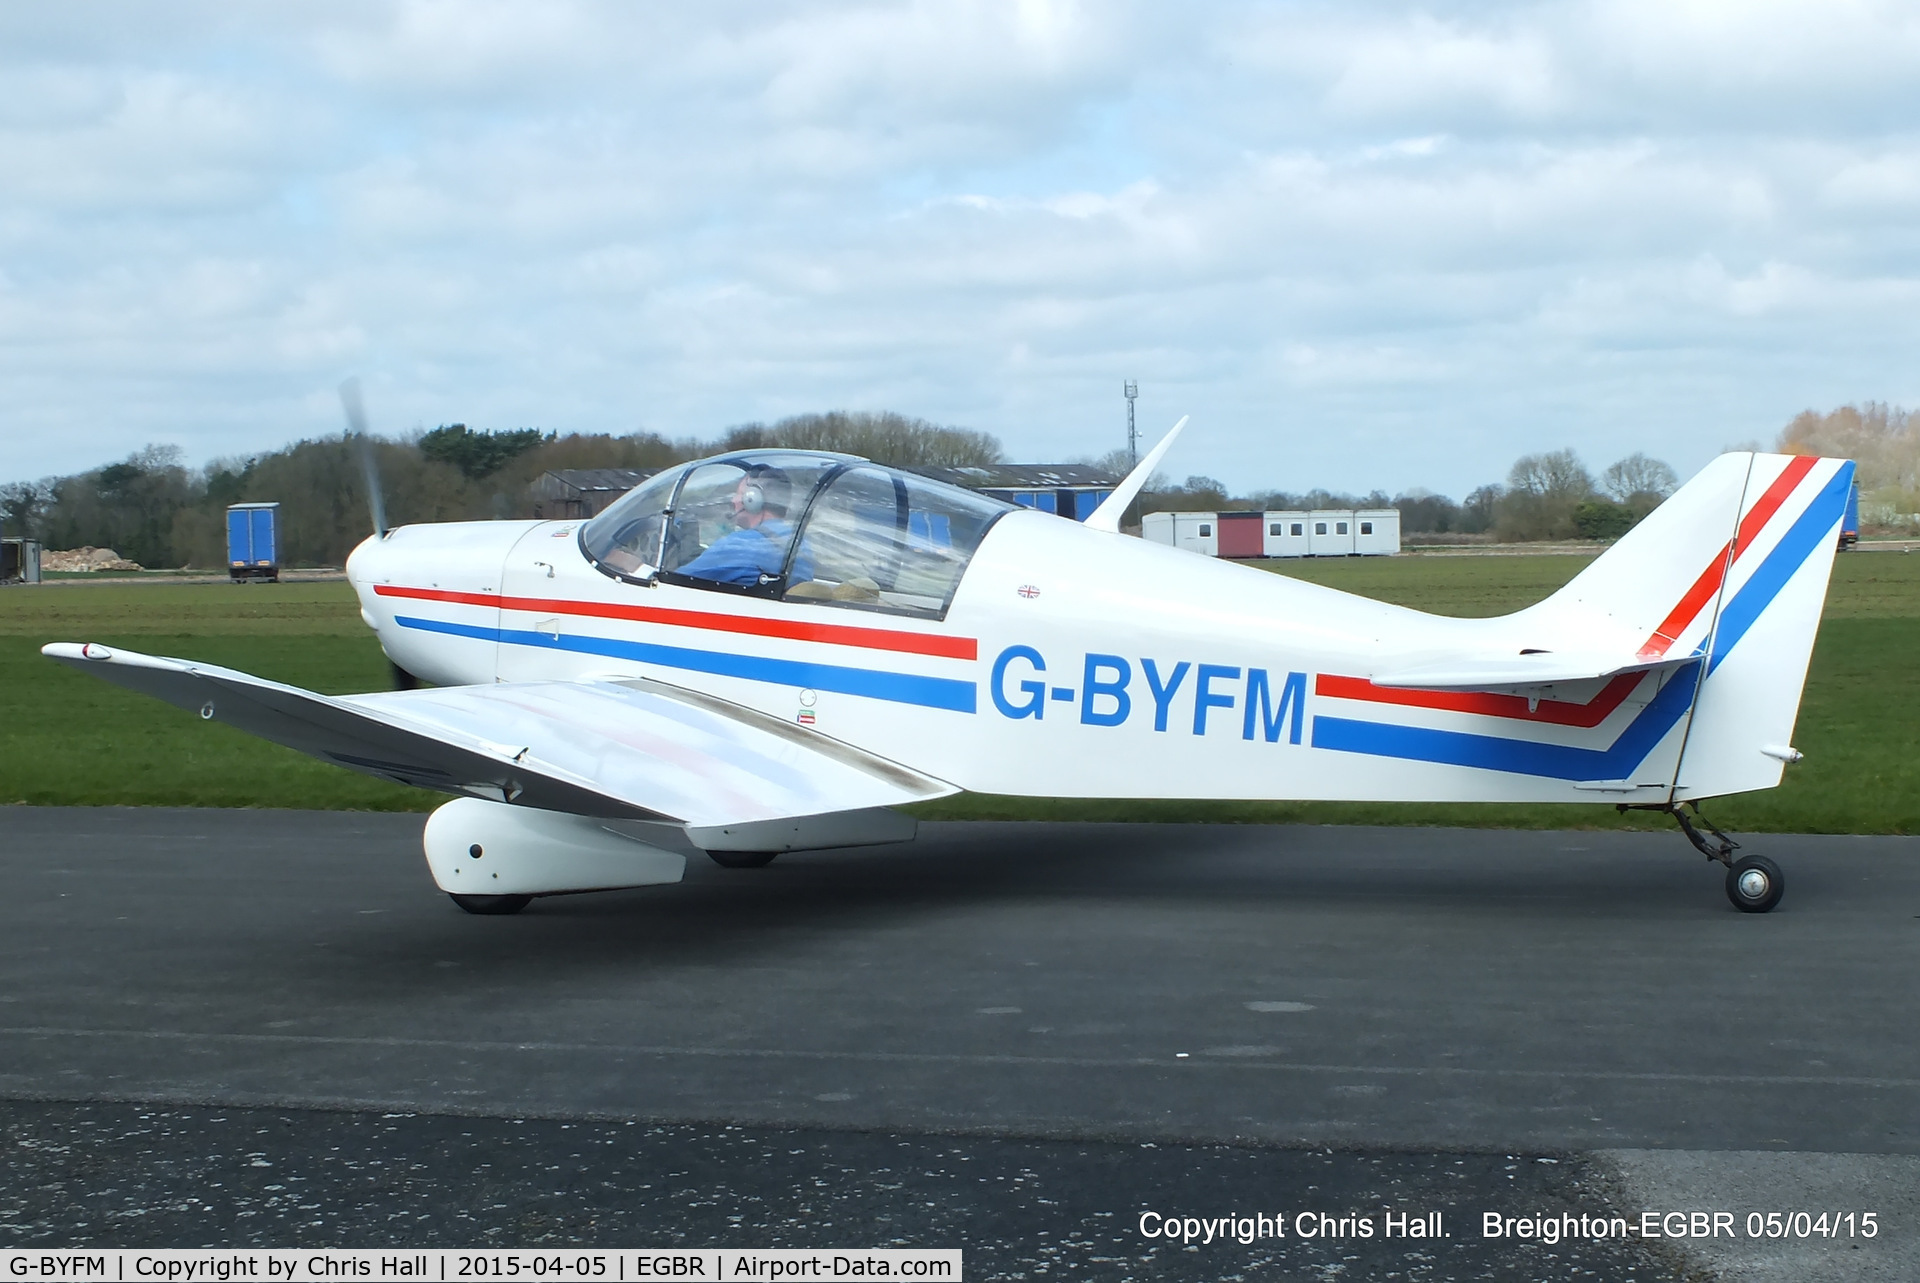 G-BYFM, 2000 Jodel DR-1050 M1 Excellence Replica C/N PFA 304-13237, at the Easter Homebuilt Aircraft Fly-in